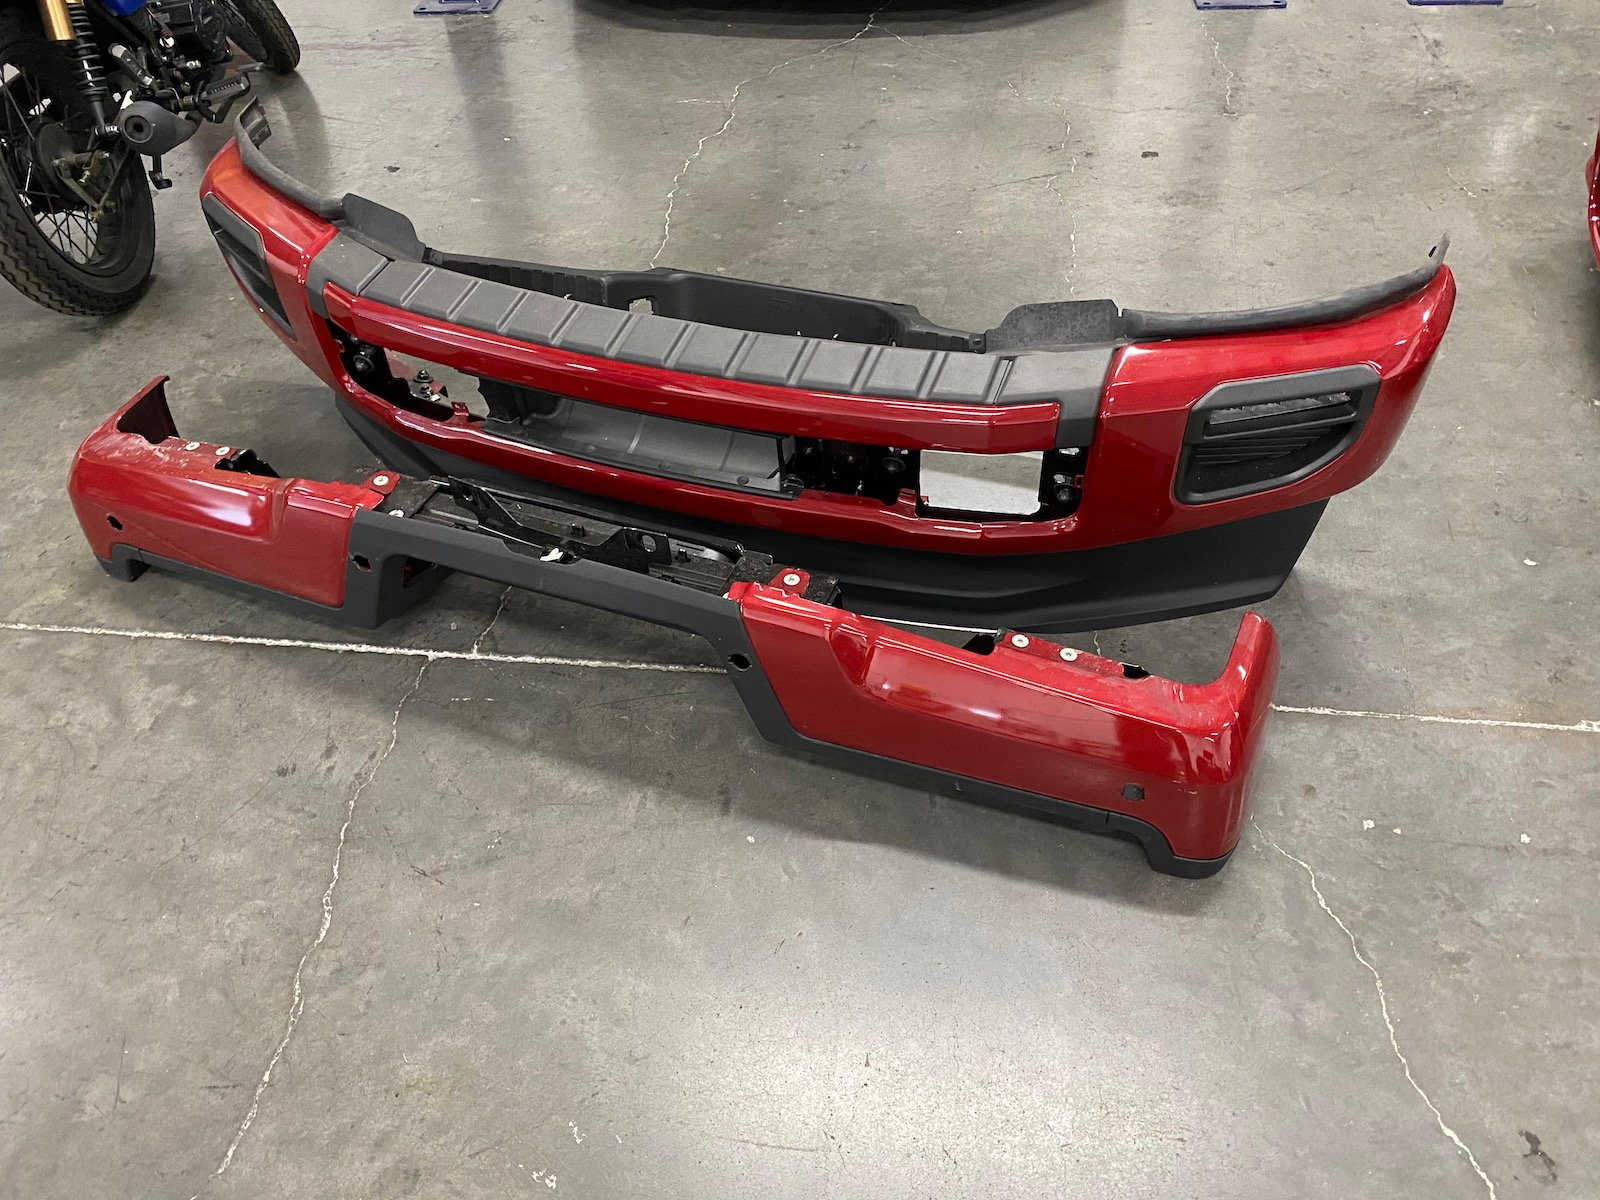 2020 Ford F-250 Super Duty - Painted Front and Rear bumpers off 2020 Platinum - Rapid Red - Las Vegas, NV 89118, United States